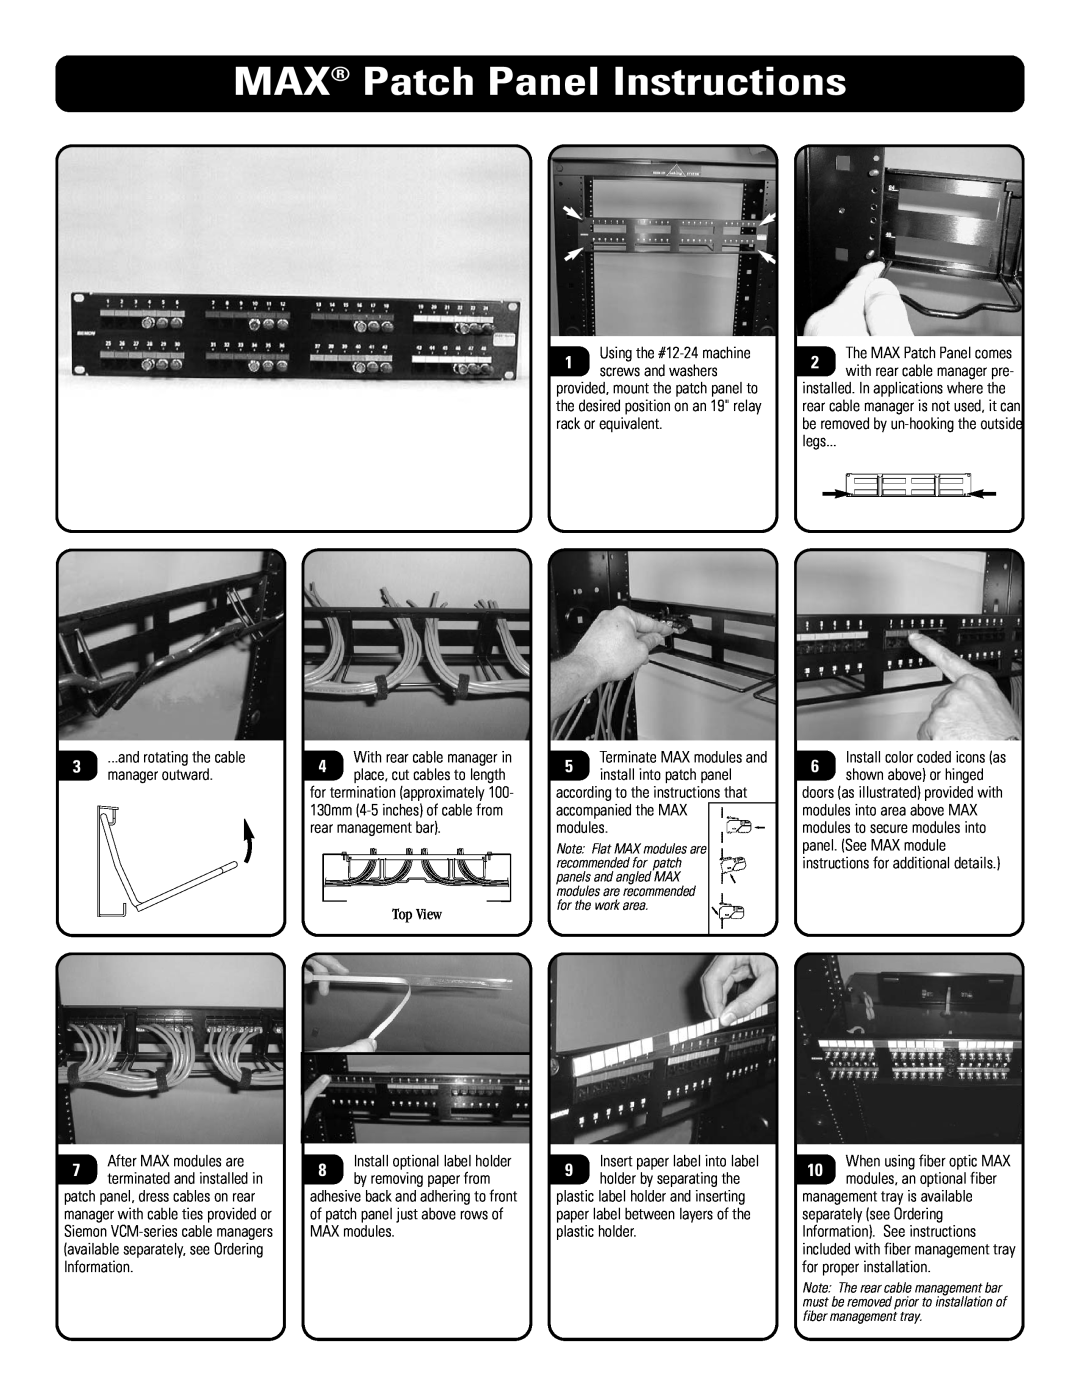 The Siemon Company manual MAX Patch Panel Instructions 